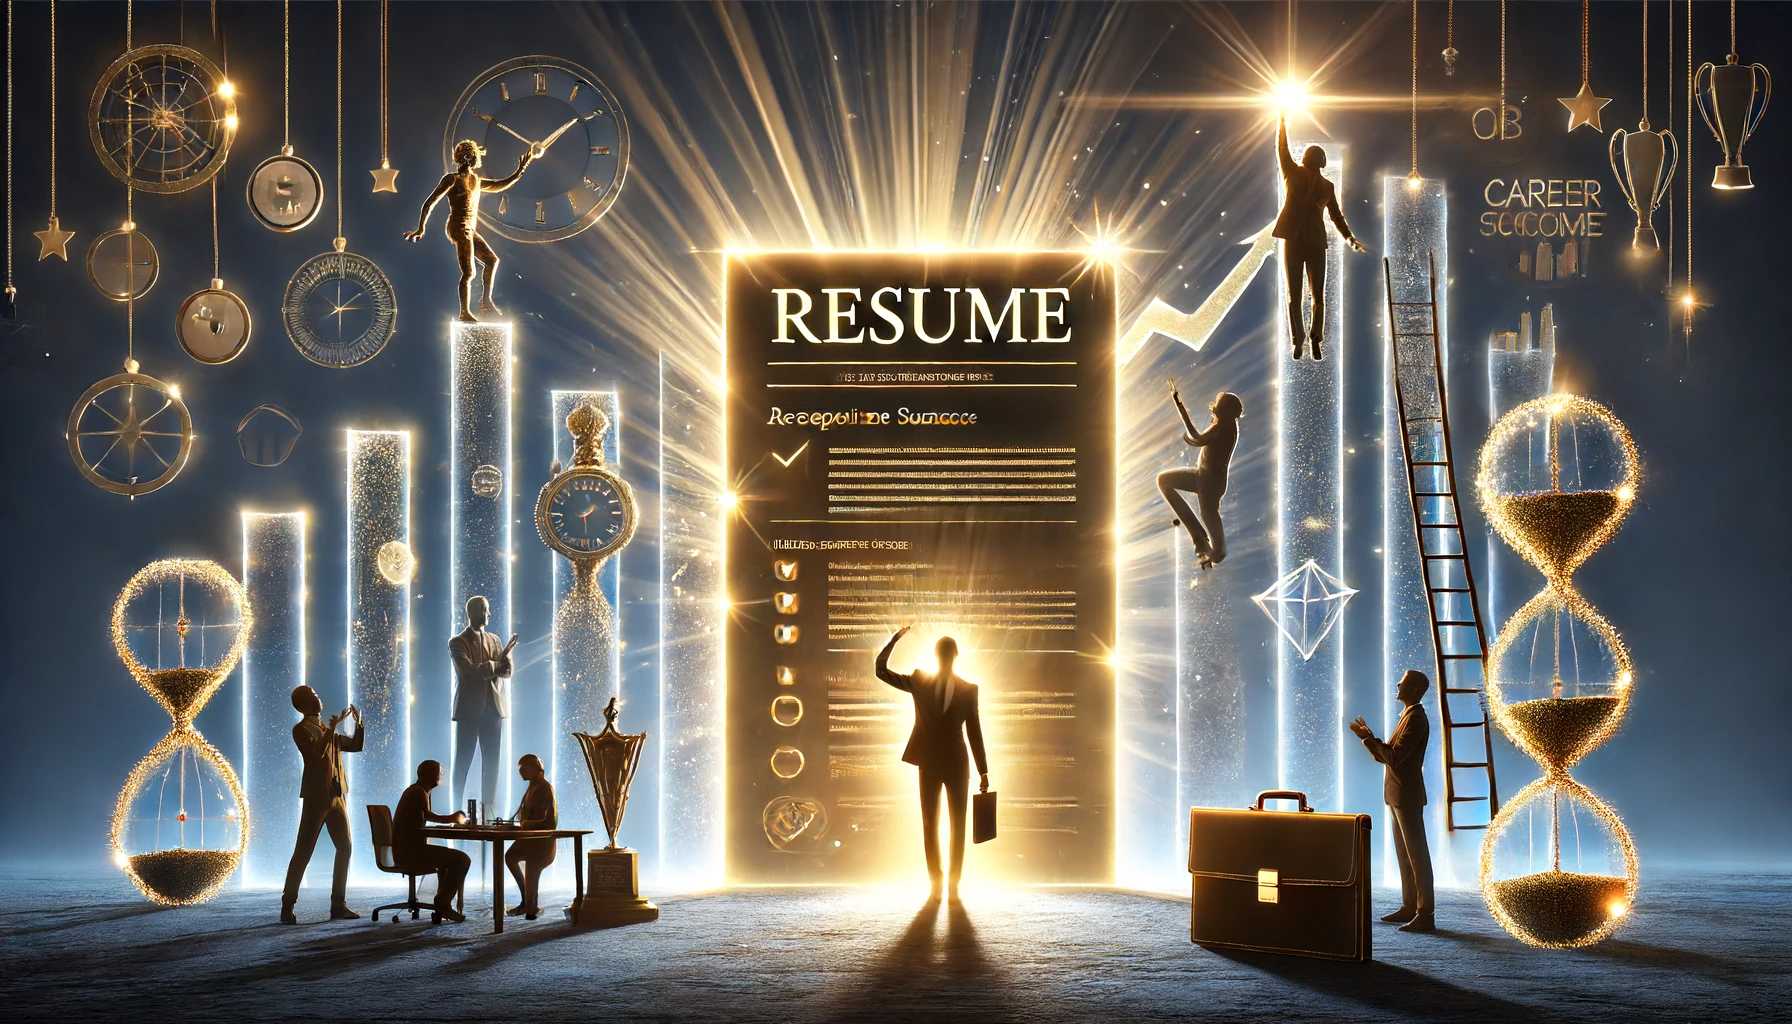 THE POWER AND EFFECT OF STRONG RESUME